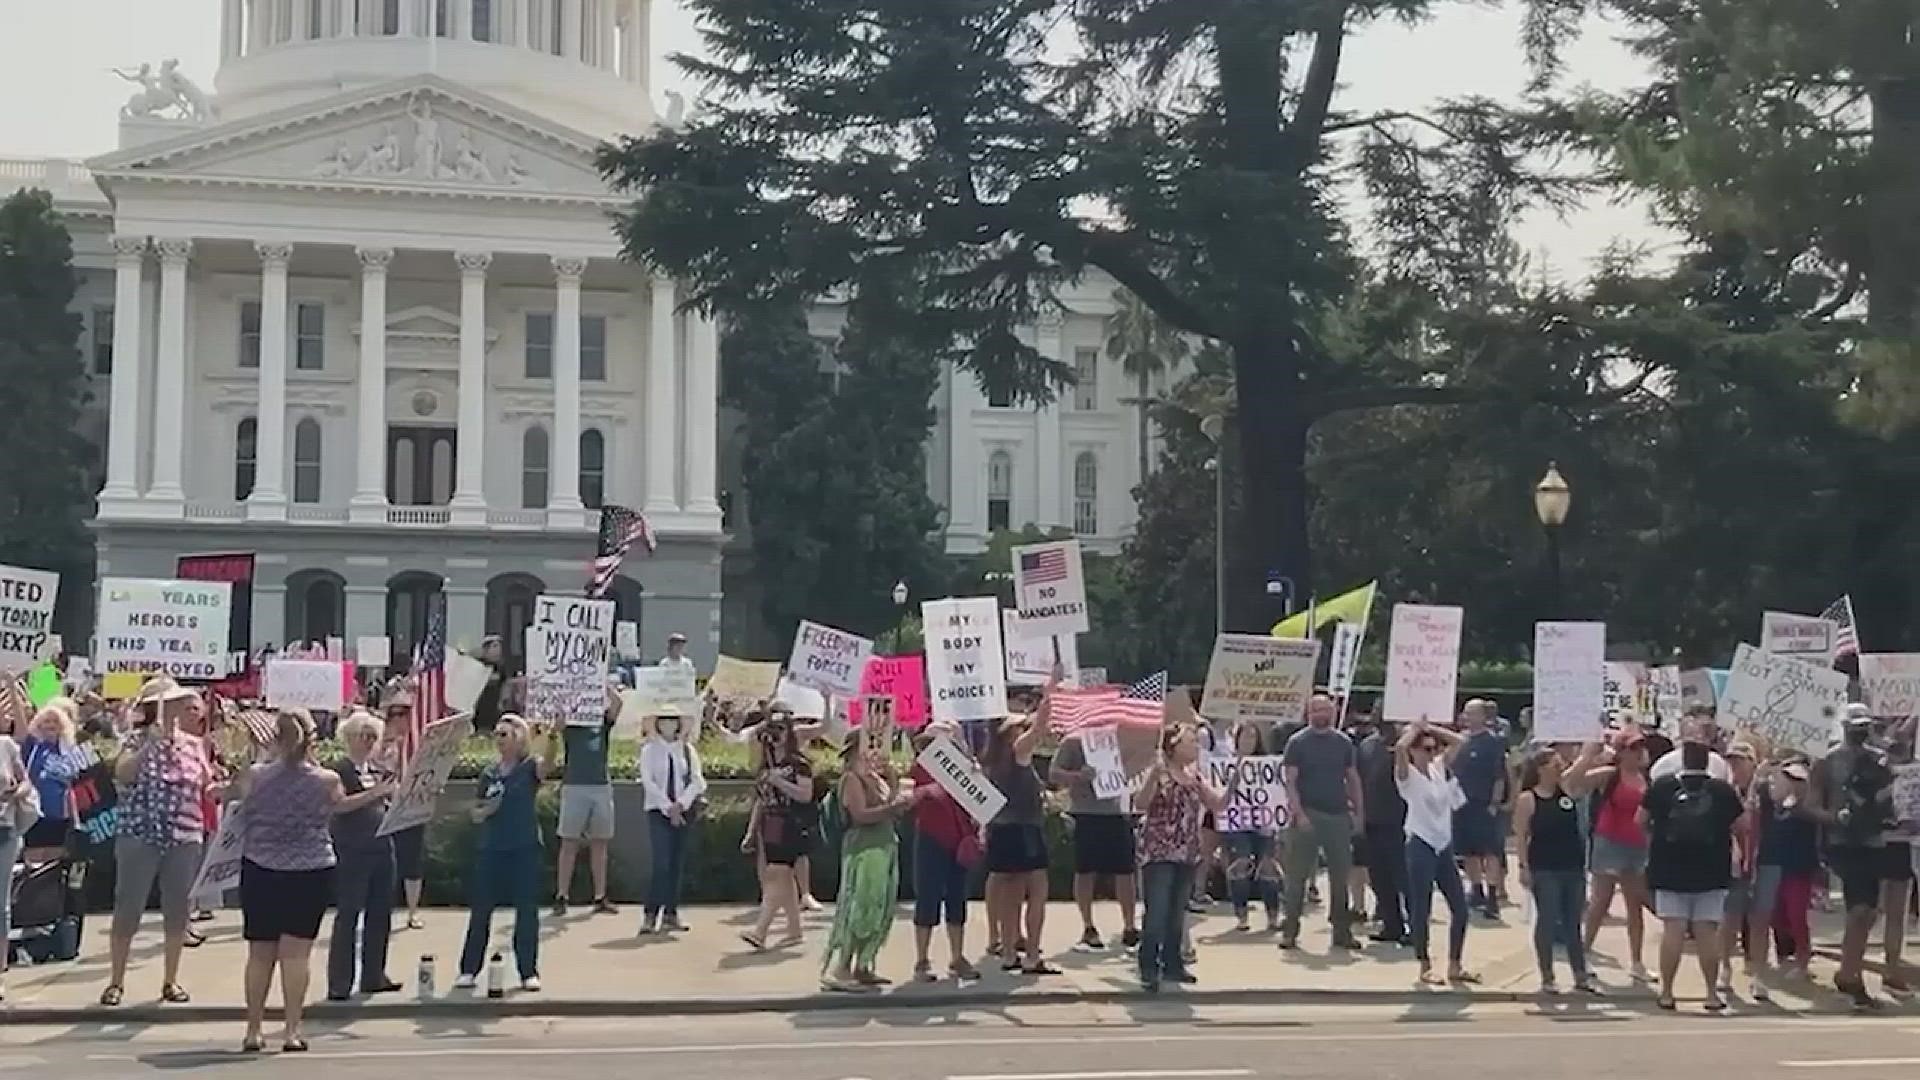 Healthcare workers and other supporters were at the California Capitol protesting the vaccine mandate.